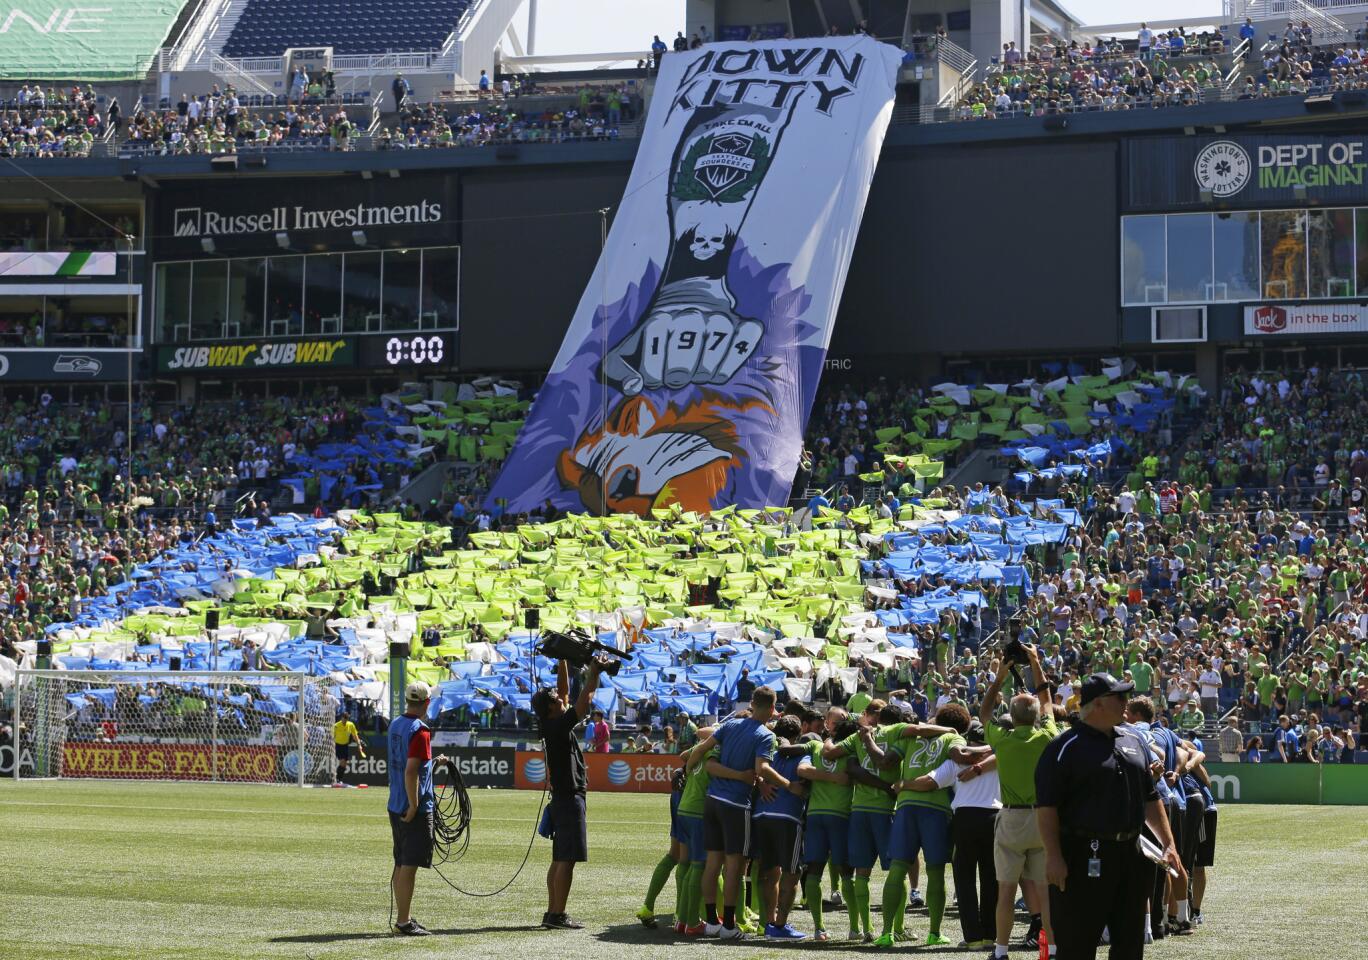 Seattle Sounders supporters show a tifo display that reads "Down Kitty" in reference to MLS Soccer's Orlando City FC's lion mascot before an MLS soccer match, Sunday, Aug. 16, 2015, in Seattle. (AP Photo/Ted S. Warren)